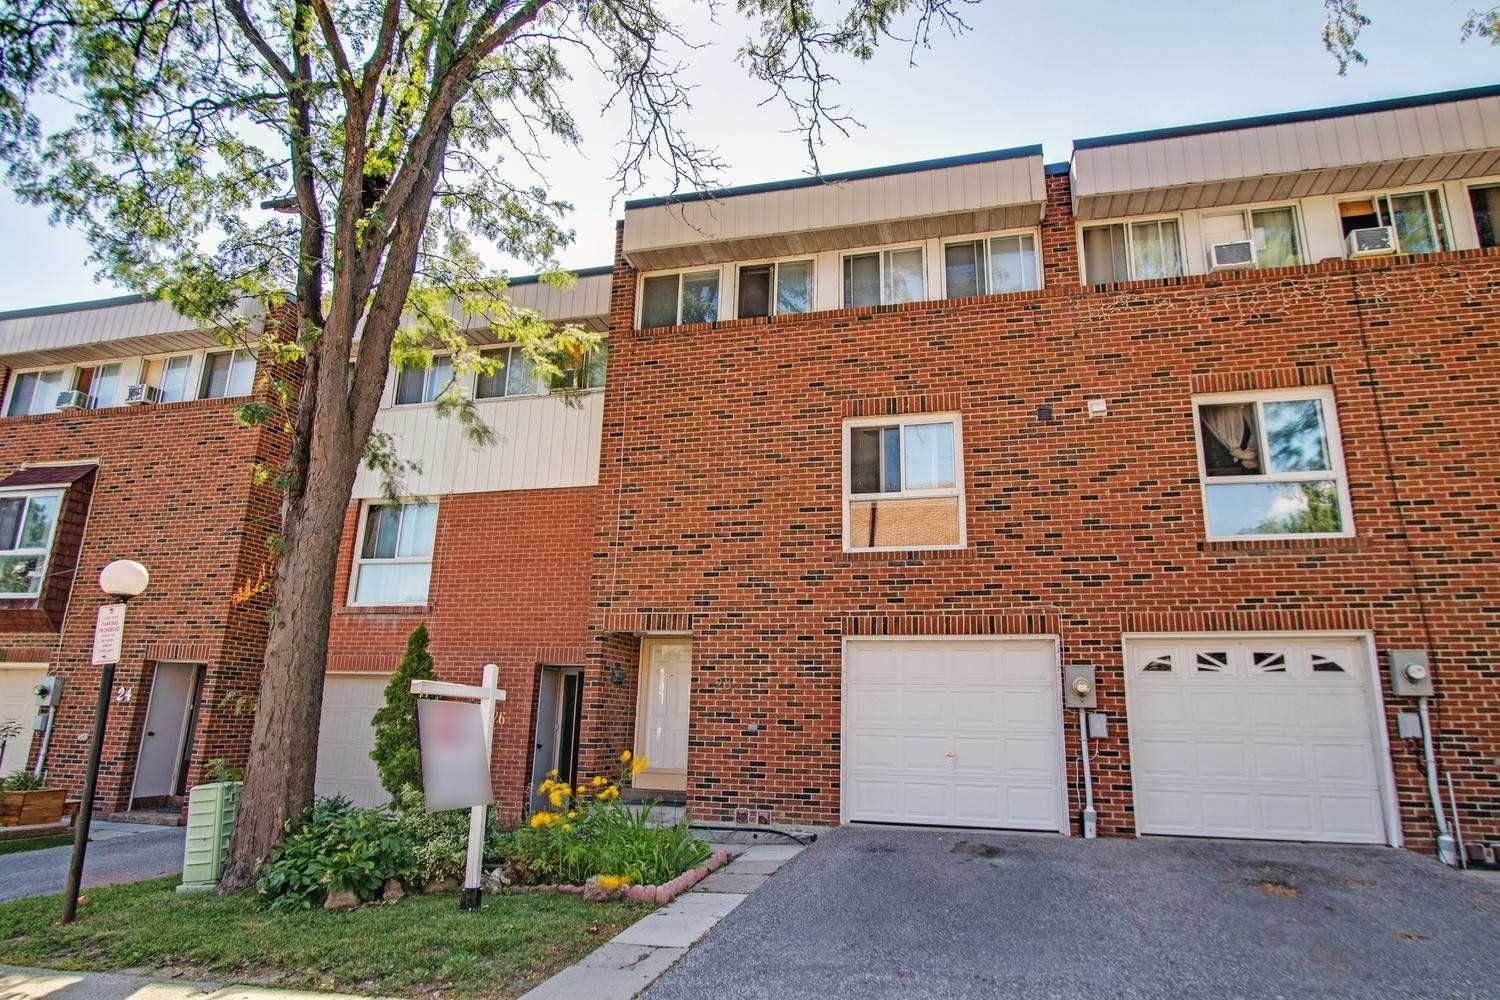 1-73 John Cabot Way. 73 John Cabot Way Townhouses is located in  North York, Toronto - image #1 of 2